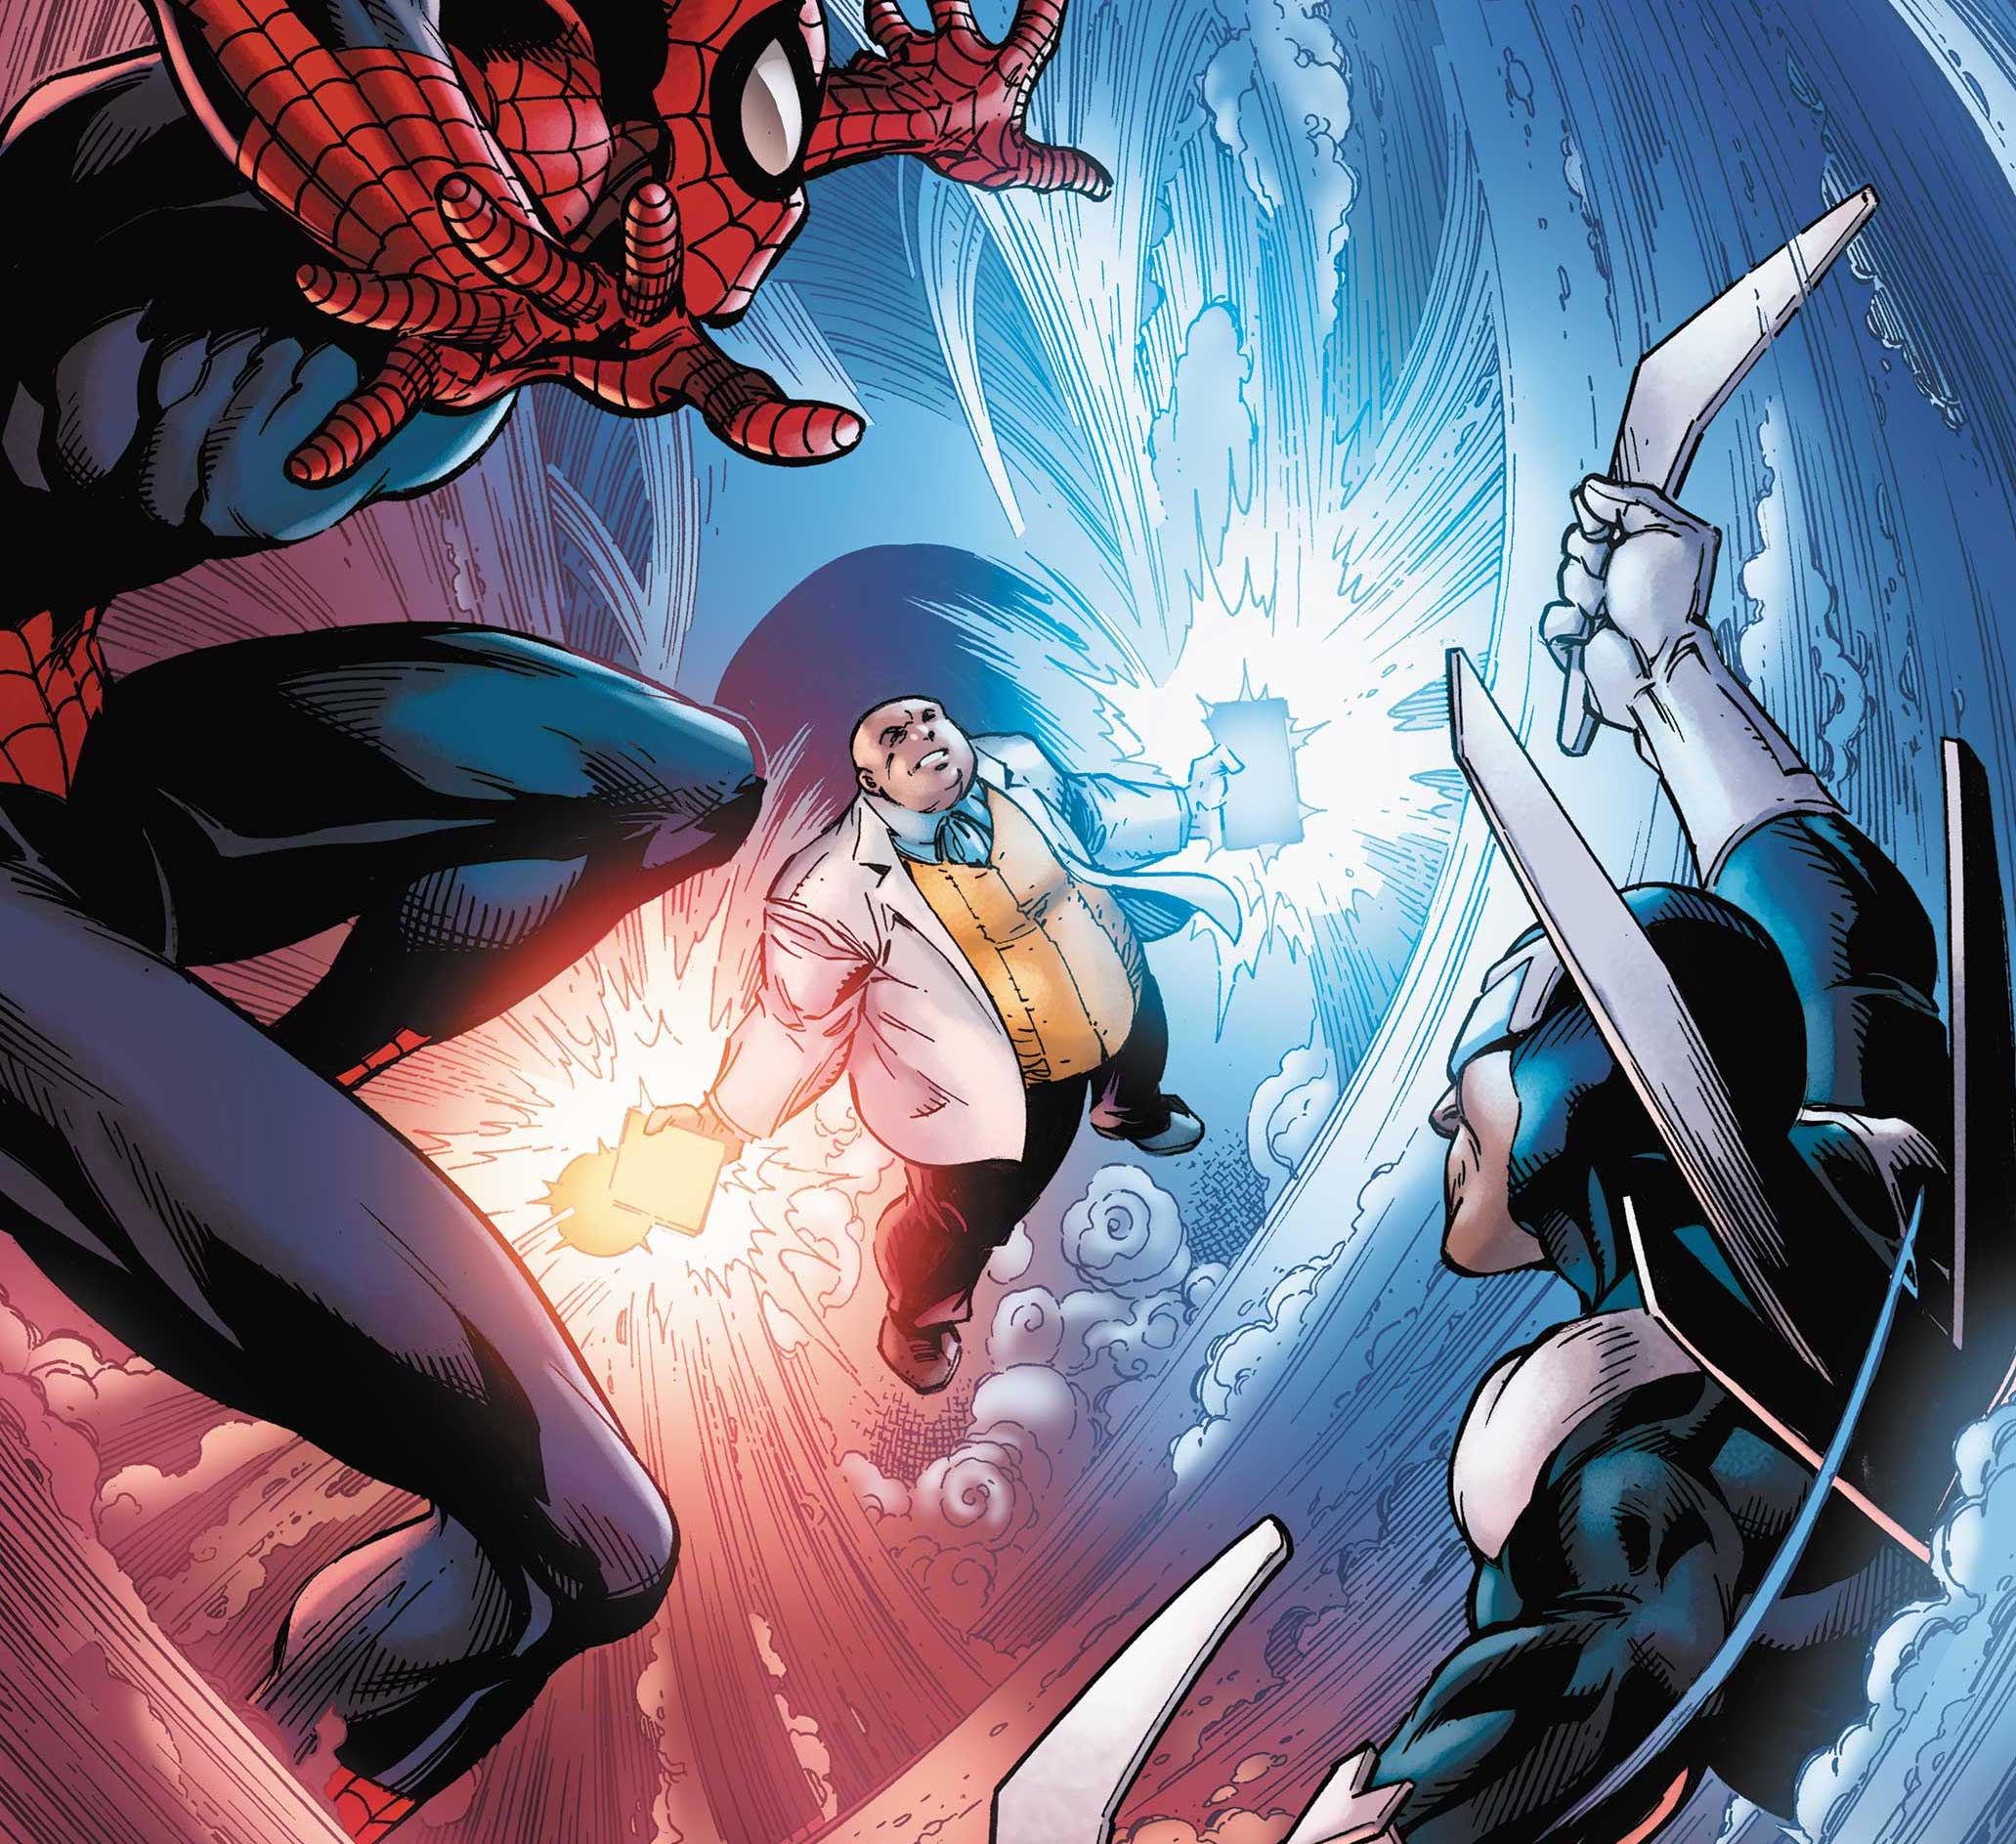 'Giant-Size Amazing Spider-Man: King’s Ransom' #1 is filled with reveals